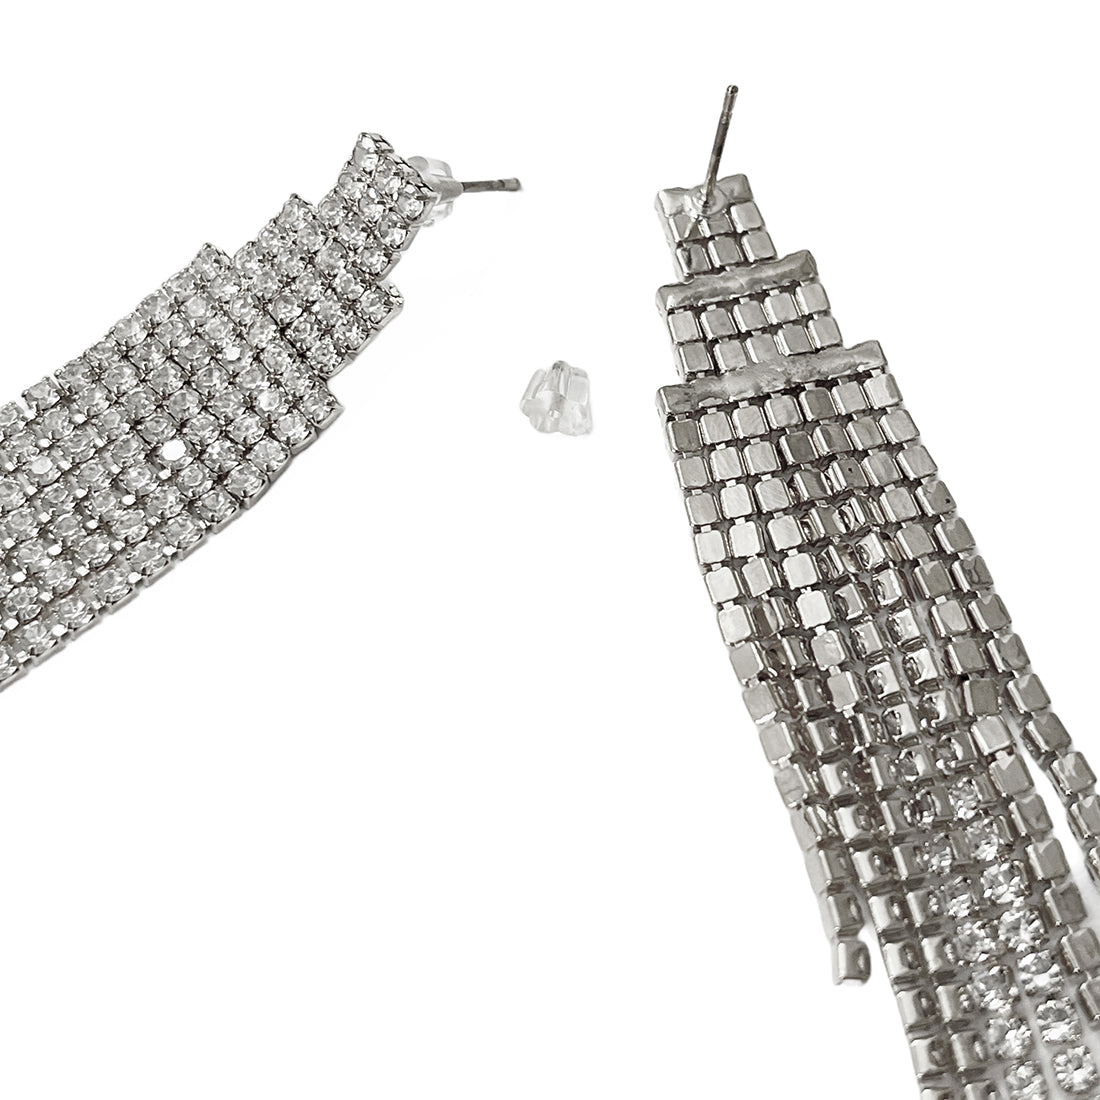 Ayesha Contemporary White Diamante Crystal Studded Silver-Toned Long Tassel Drop Earrings